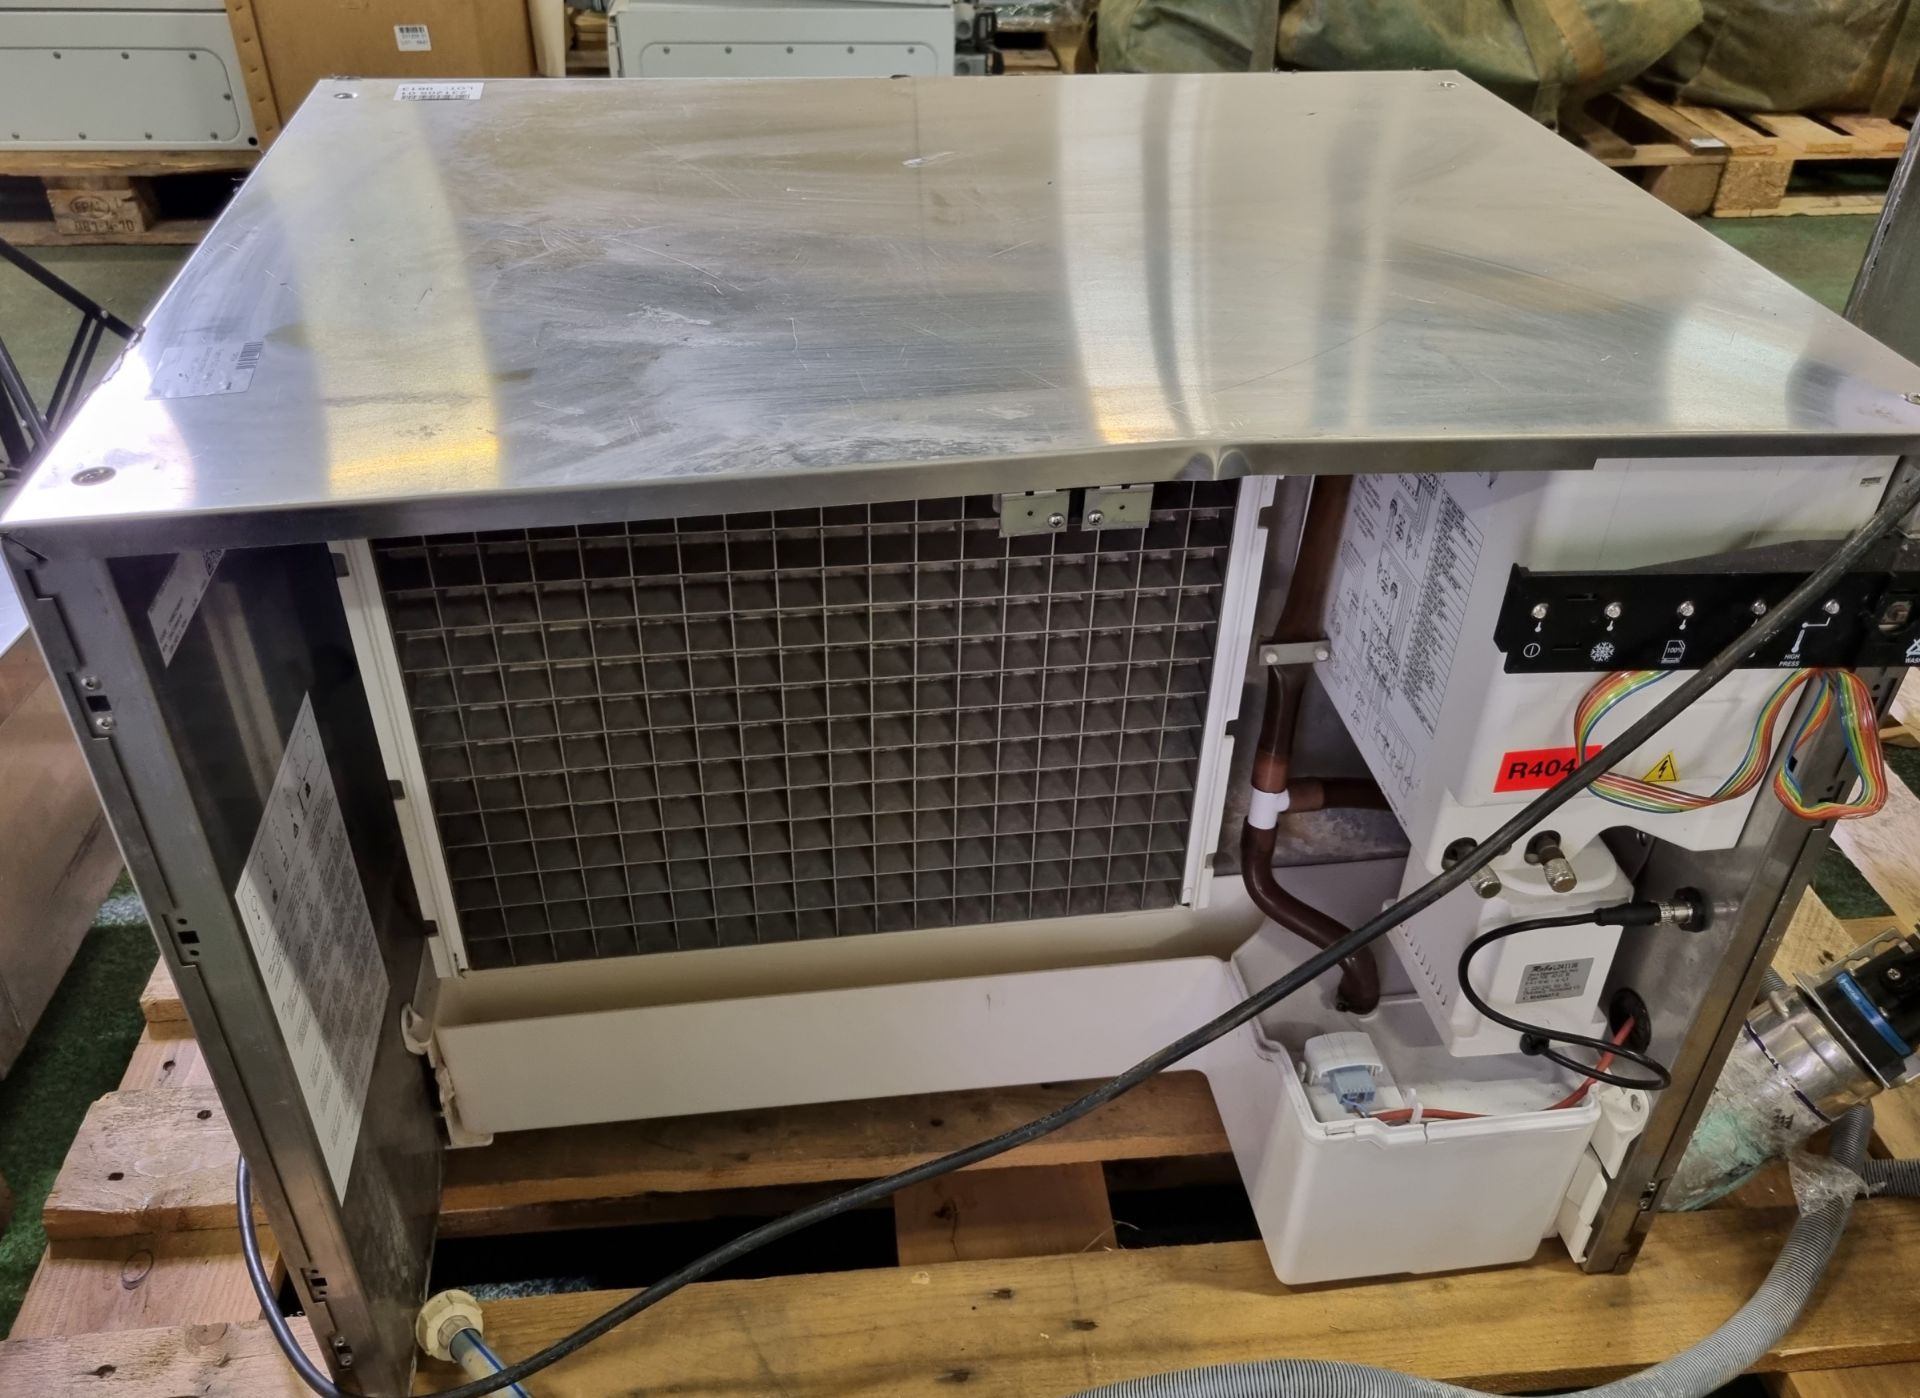 Foster F202 modular air-cooled ice maker - L 760 x W 580 x H 570mm - Image 2 of 4